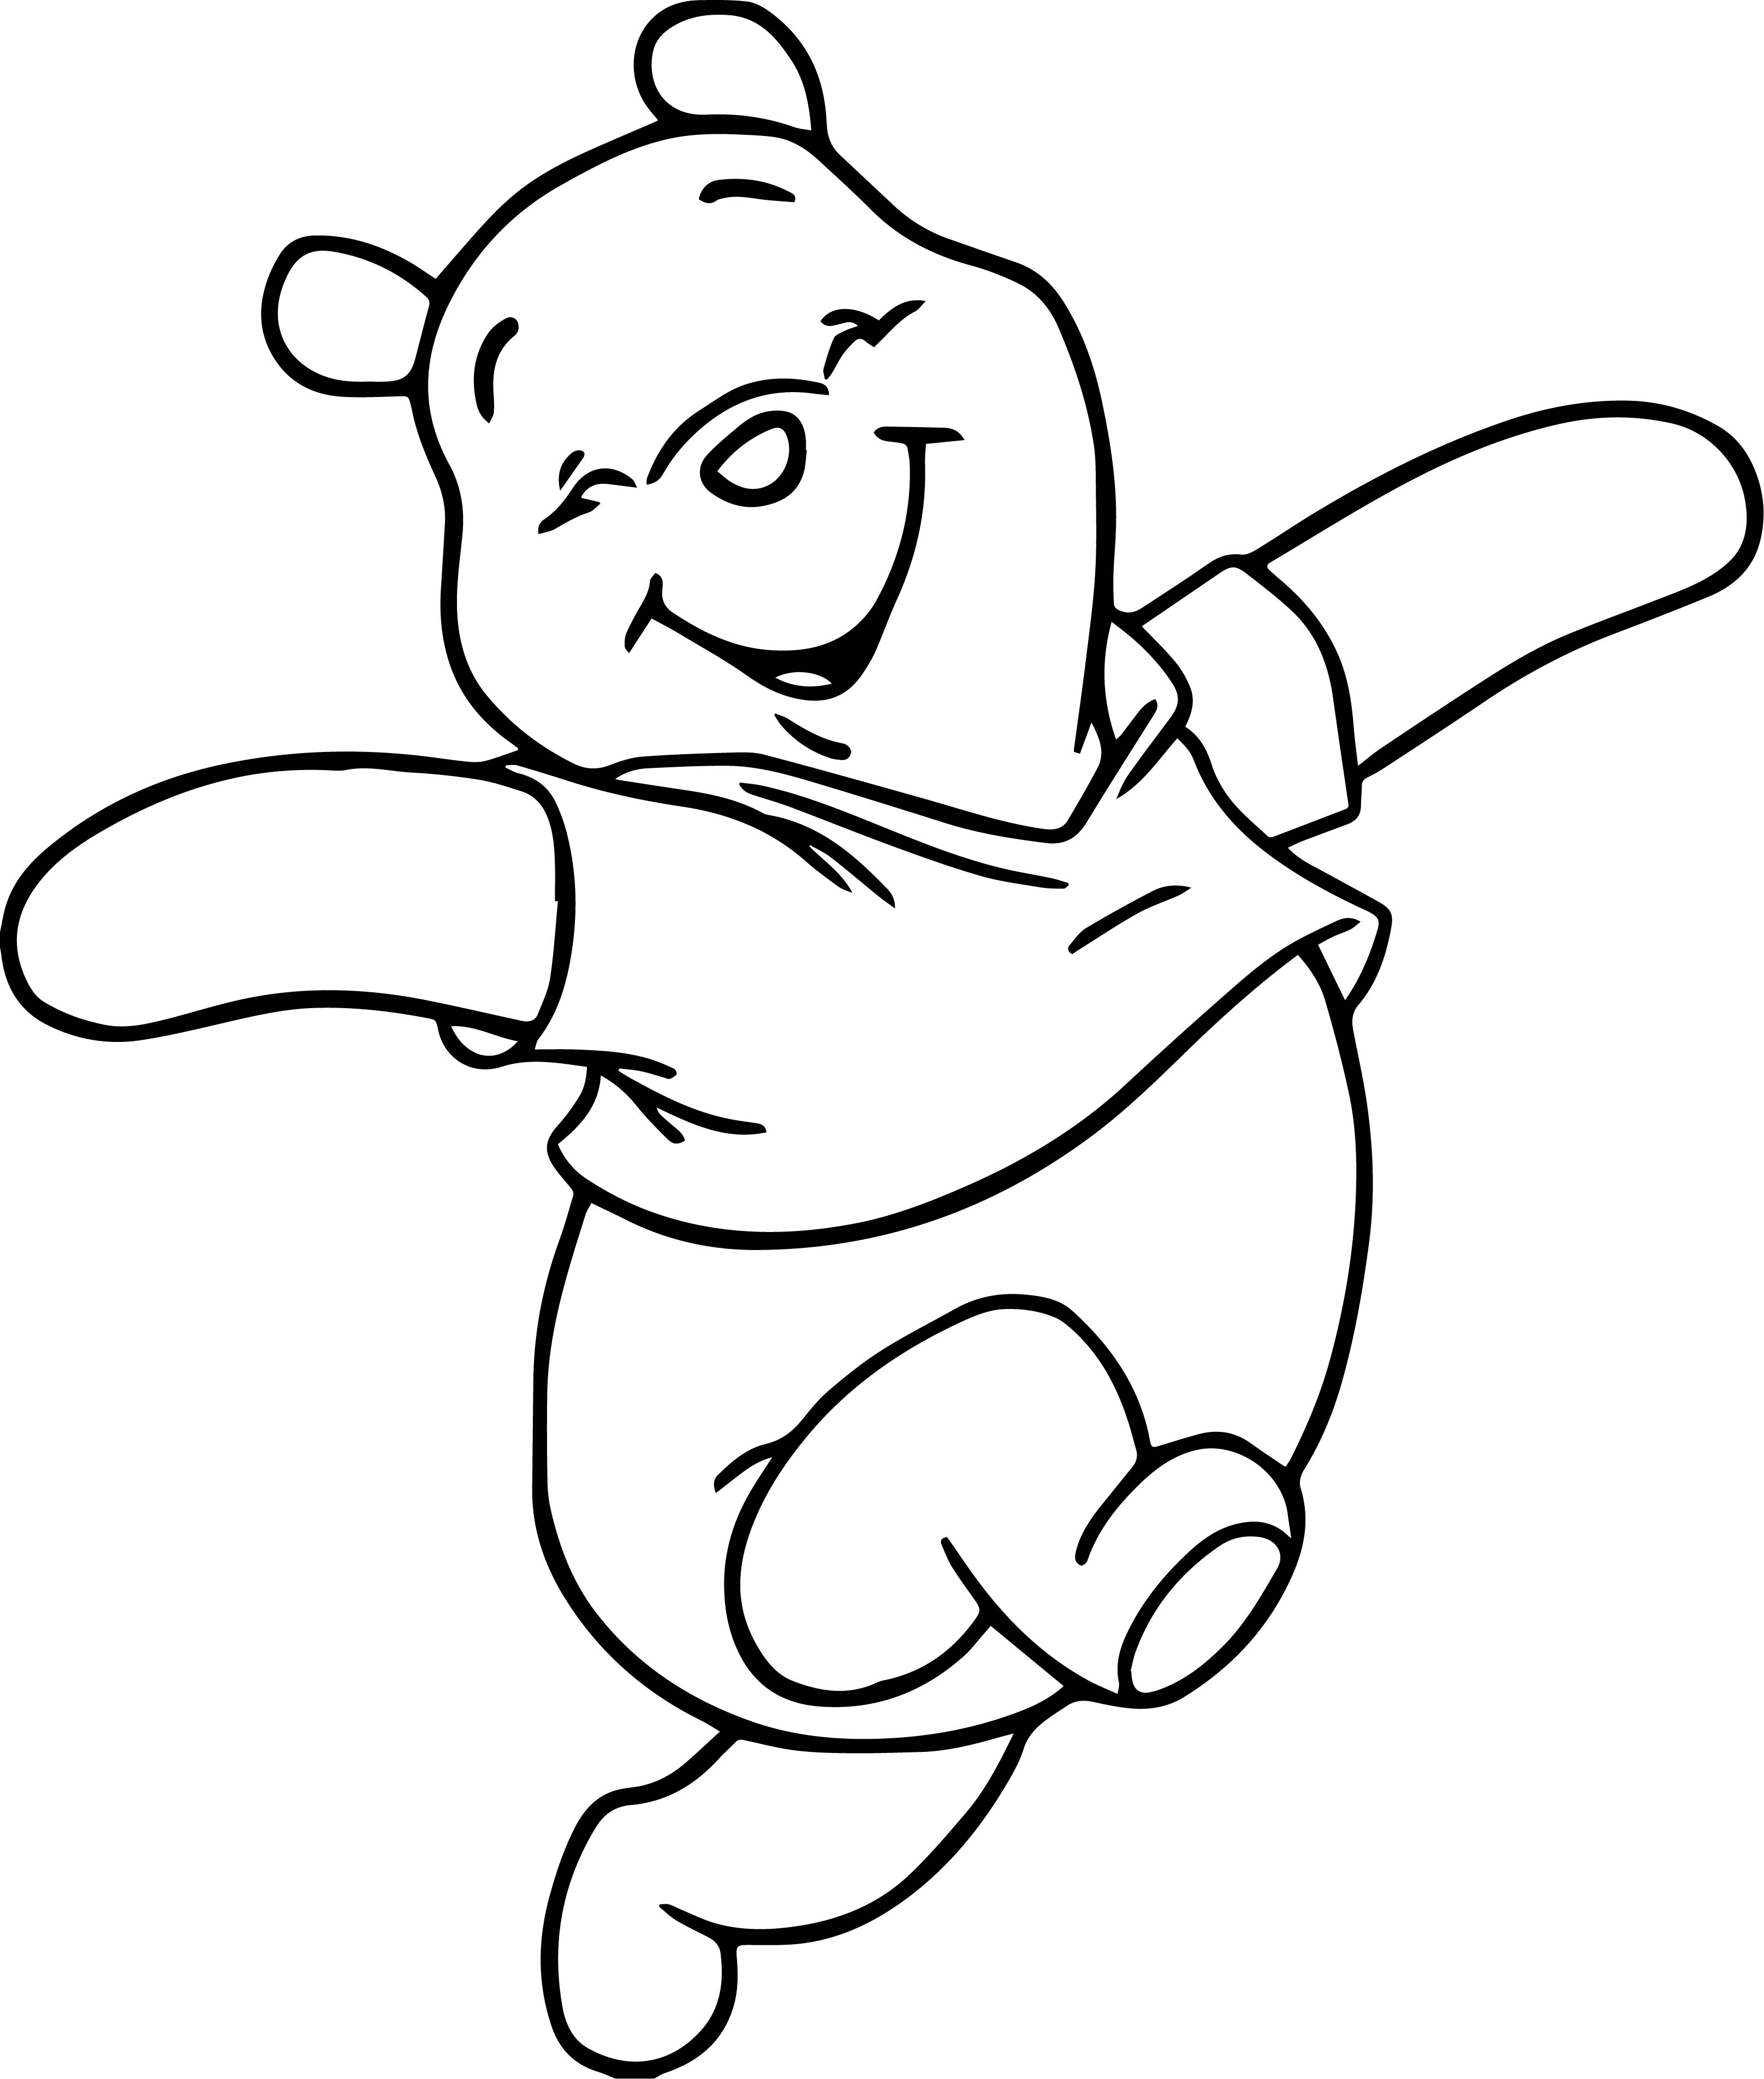 Cartoon Butterflies Coloring Pages Winnie Pooh Happy Butterfly Coloring Page The Cartoon Best Free